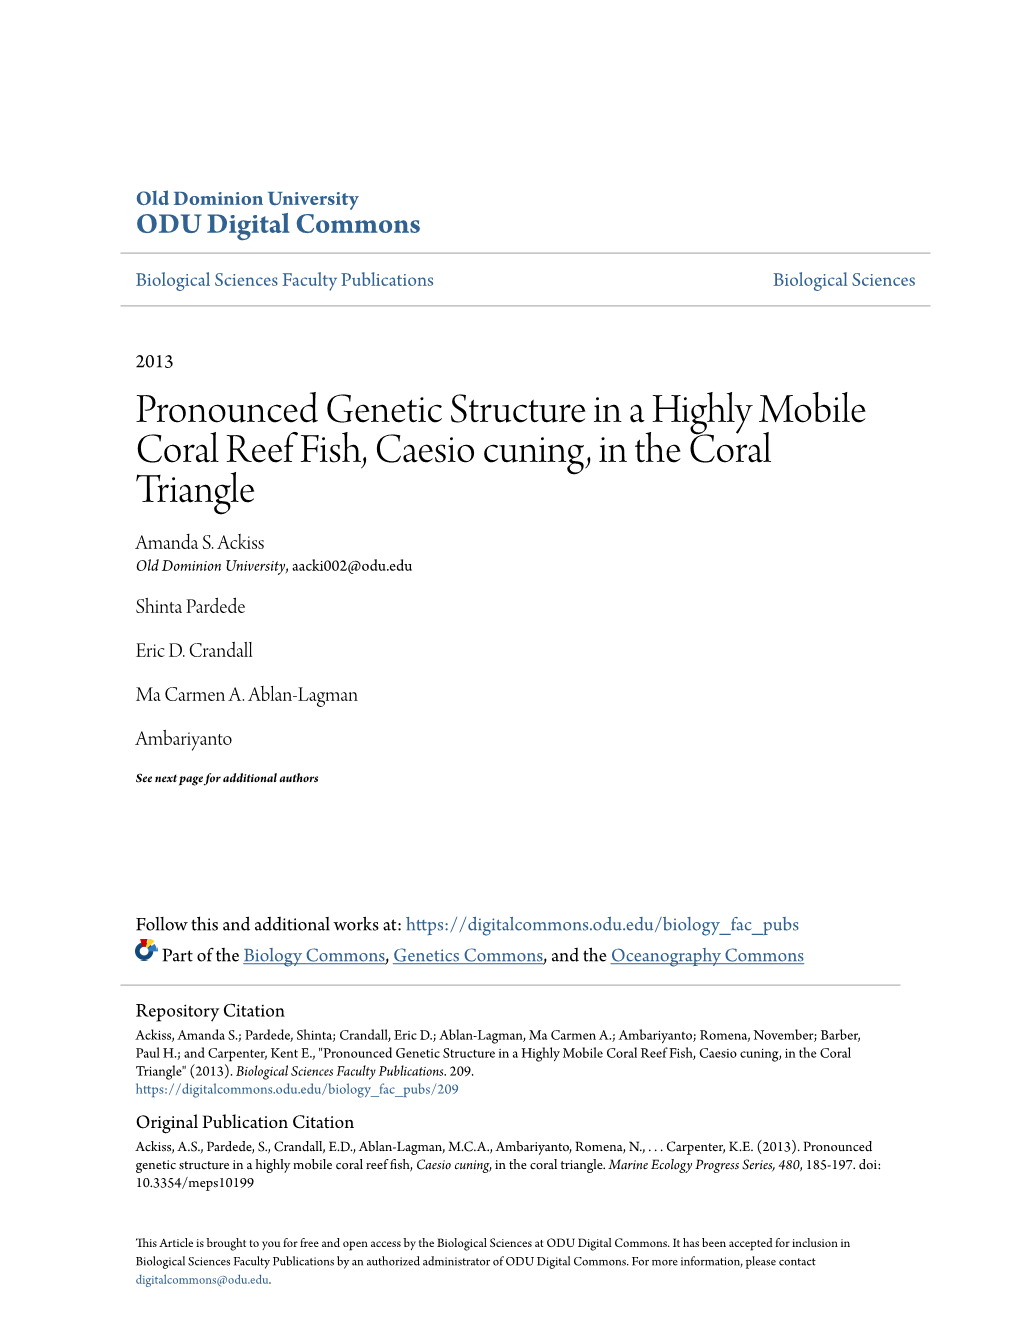 Pronounced Genetic Structure in a Highly Mobile Coral Reef Fish, Caesio Cuning, in the Coral Triangle Amanda S